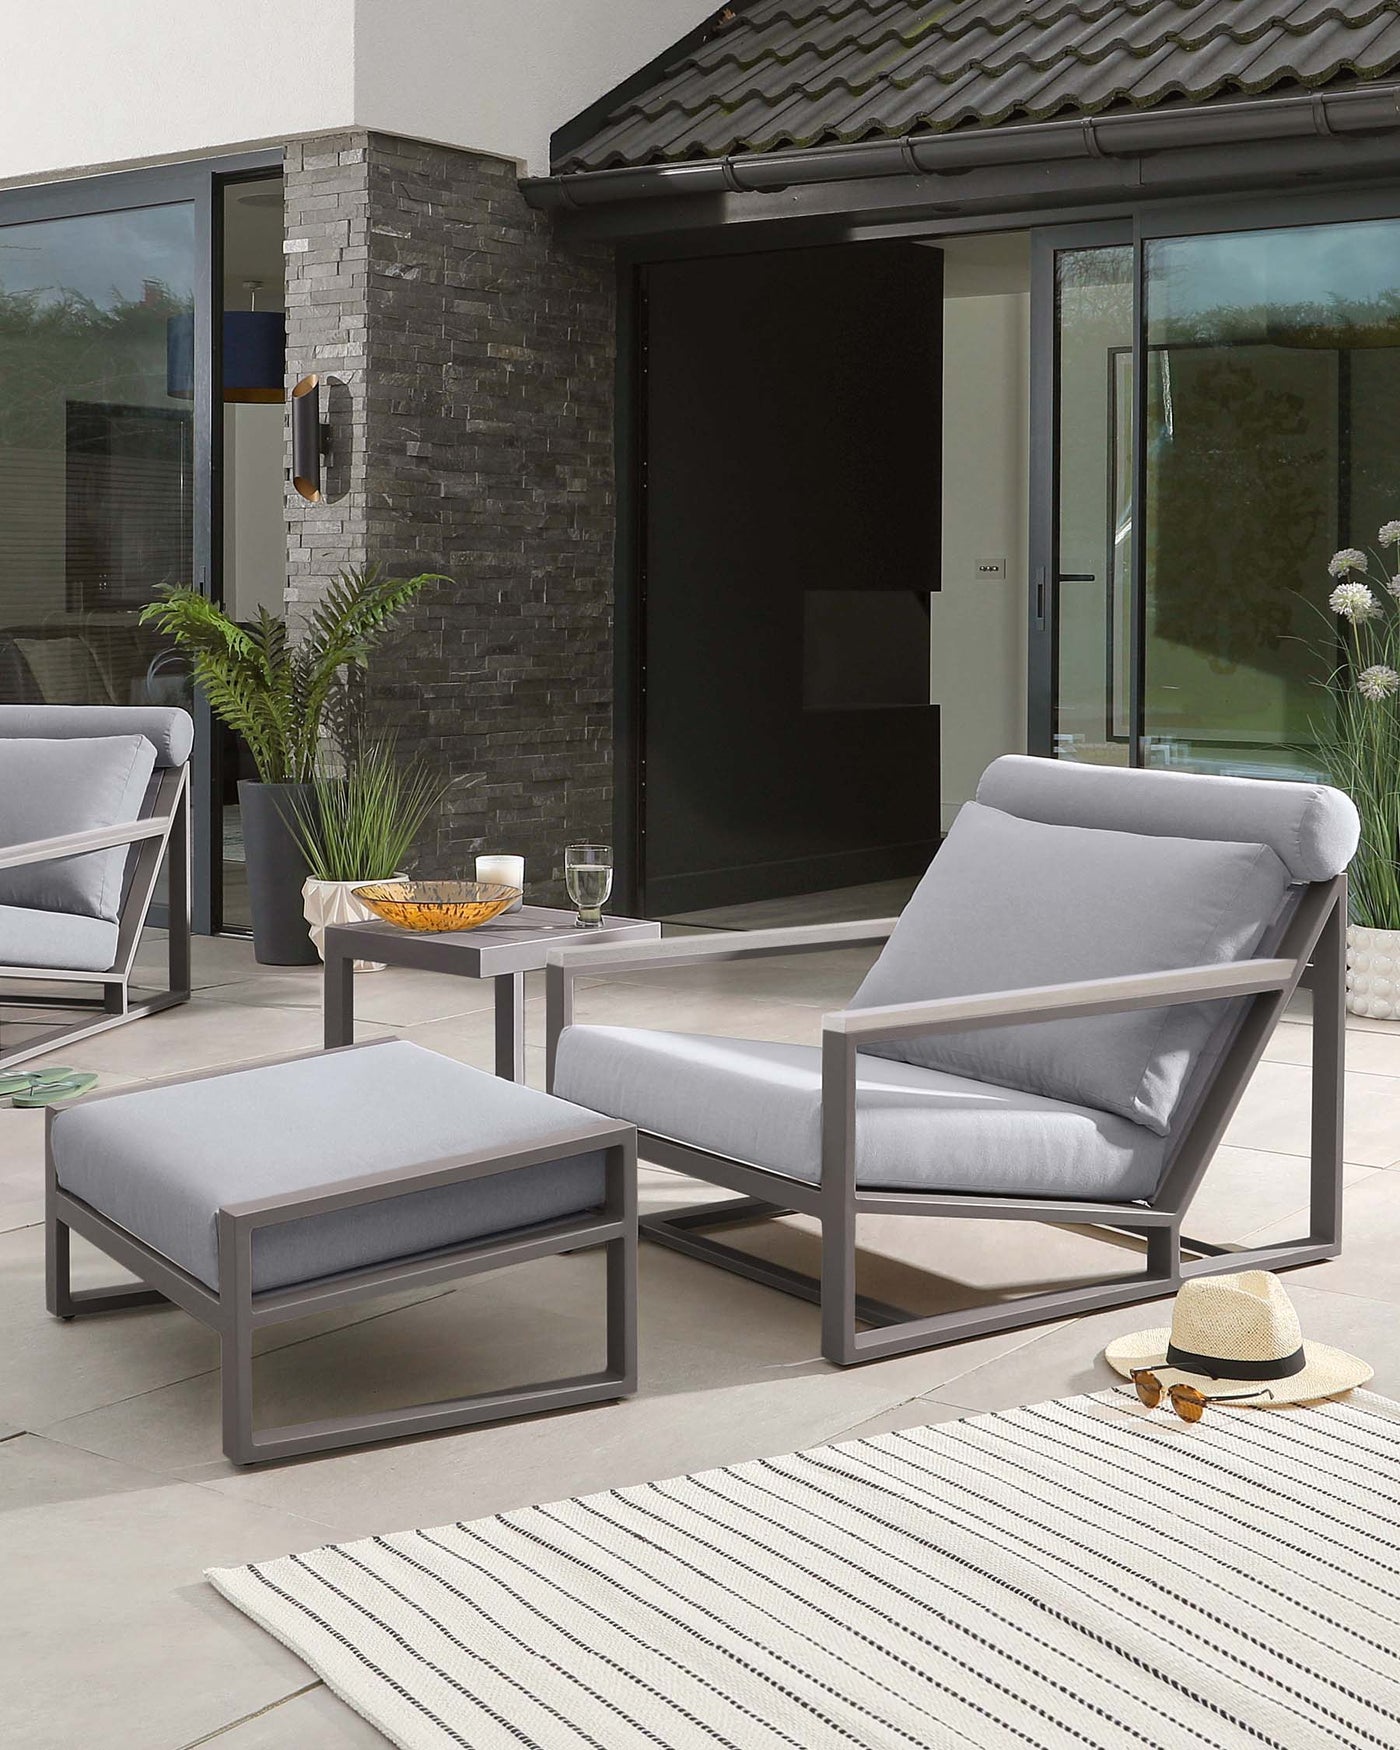 Modern outdoor patio furniture featuring a sleek grey metal frame with complementary light grey cushions. The set includes a comfortable armchair, a matching ottoman, and a simple, elegant side table with a clear tabletop. The design is clean and contemporary, perfect for chic outdoor lounging areas.